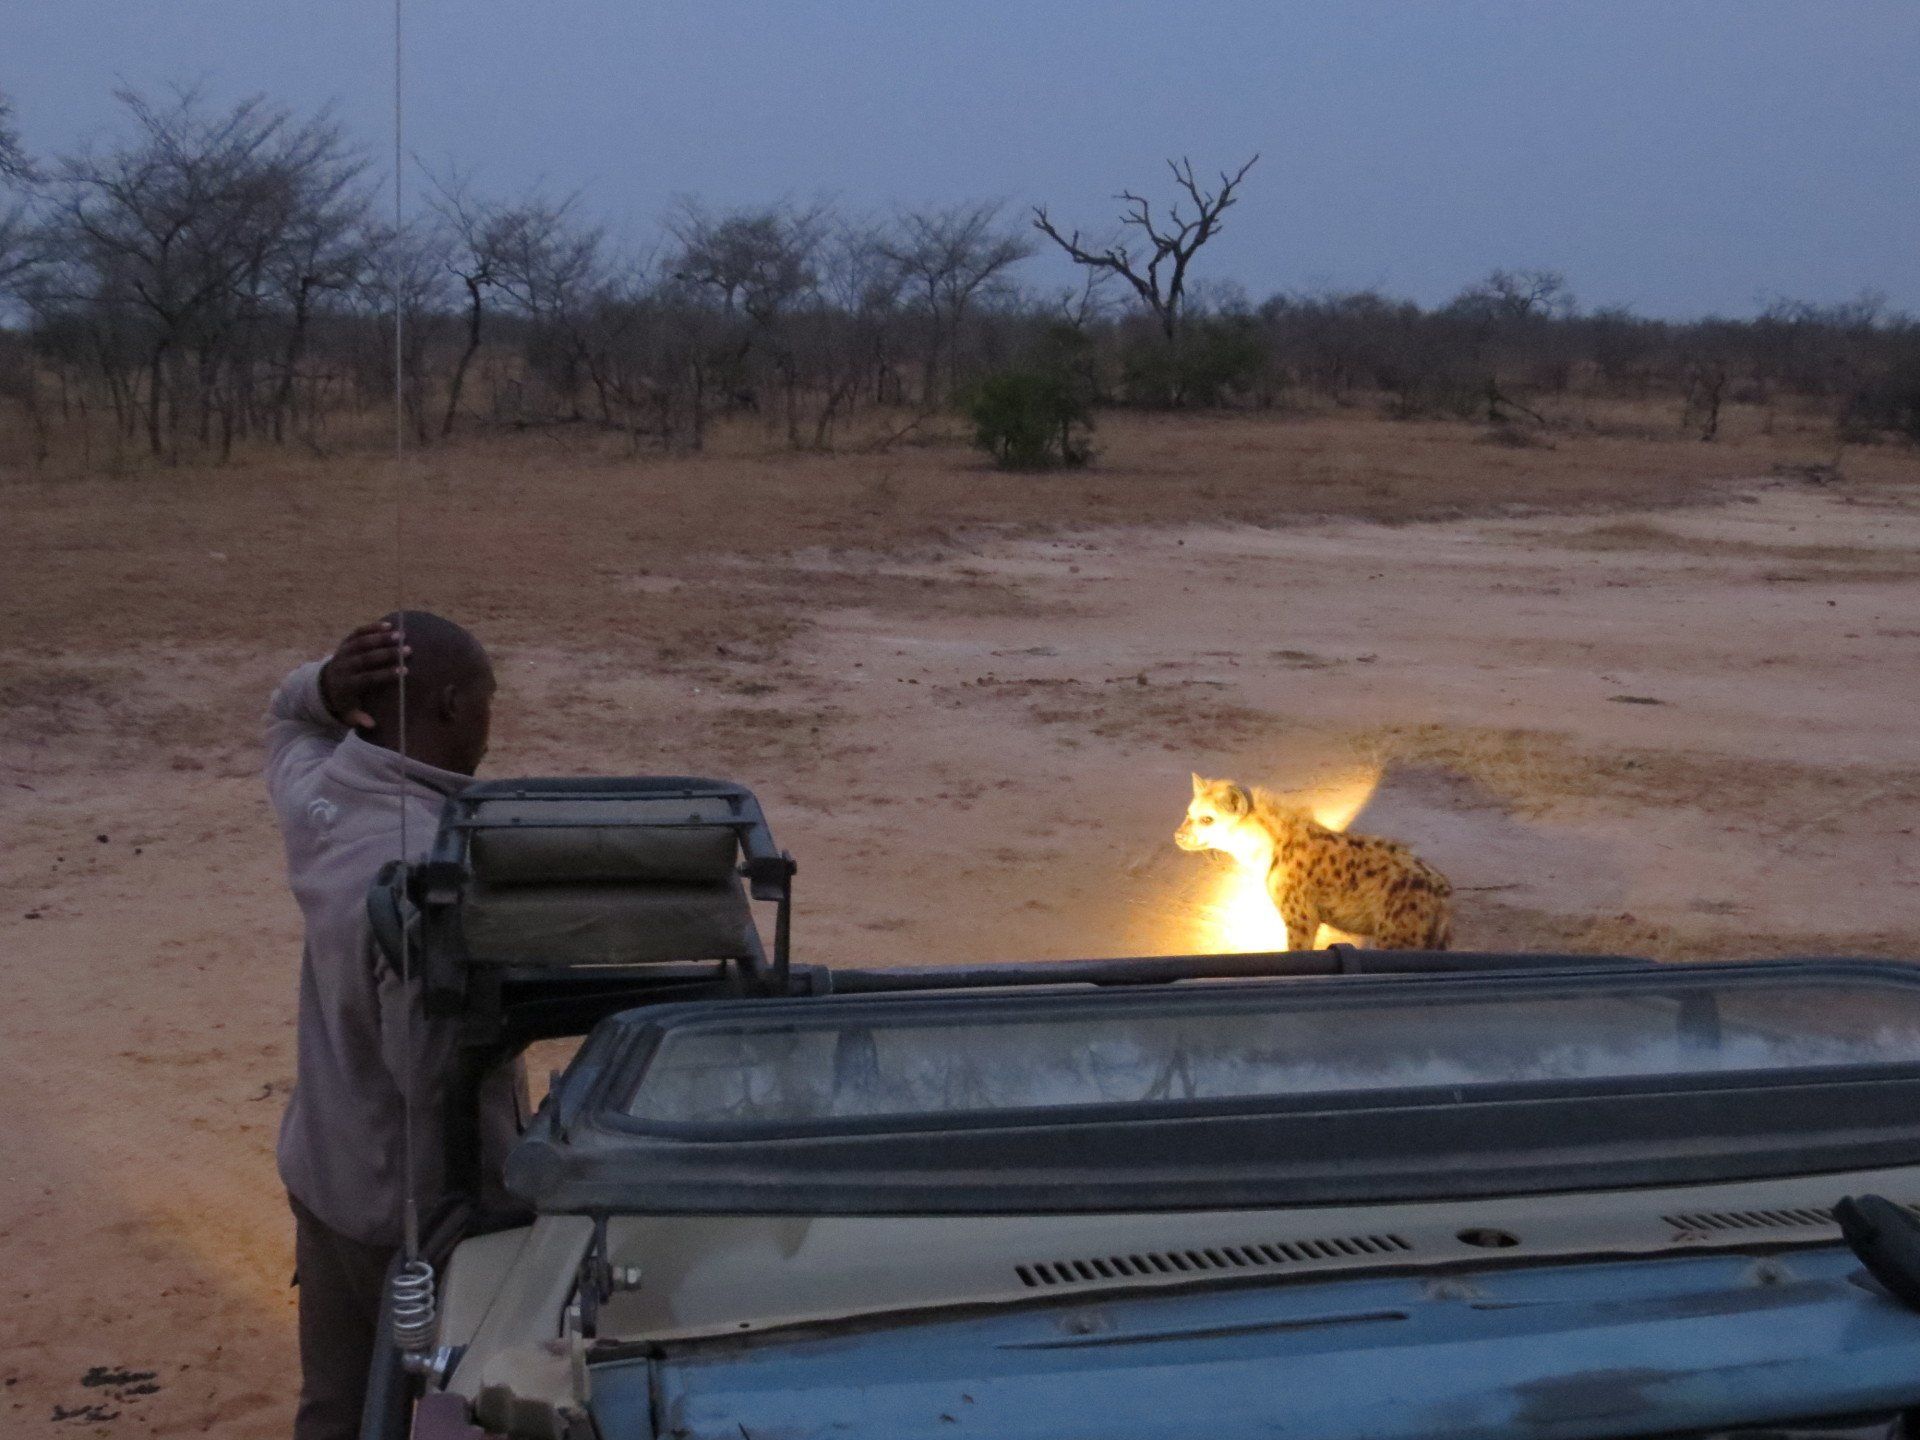 a man stands in front of a jeep looking at a hyena